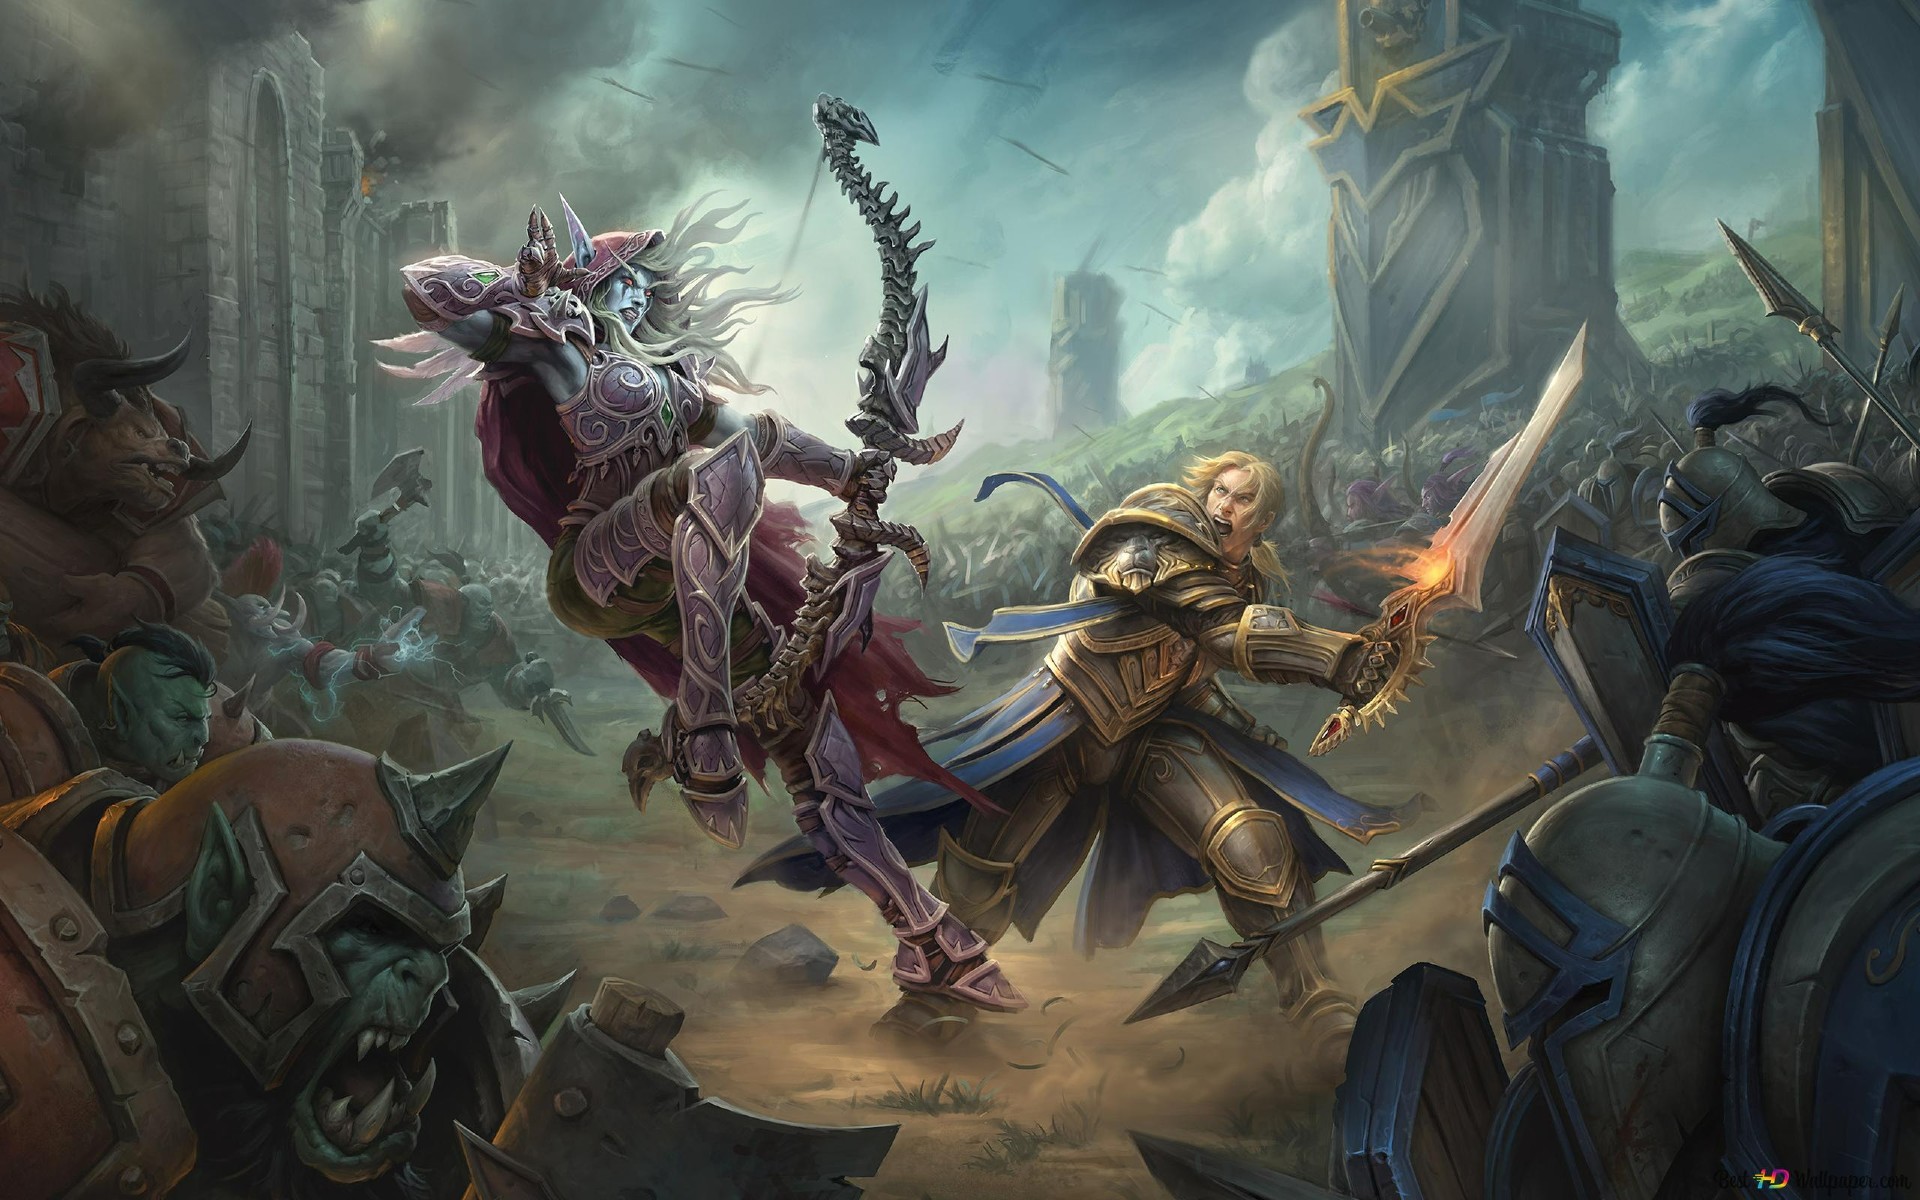 WoW's cross-faction guilds don't take the 'war' out of Warcraft